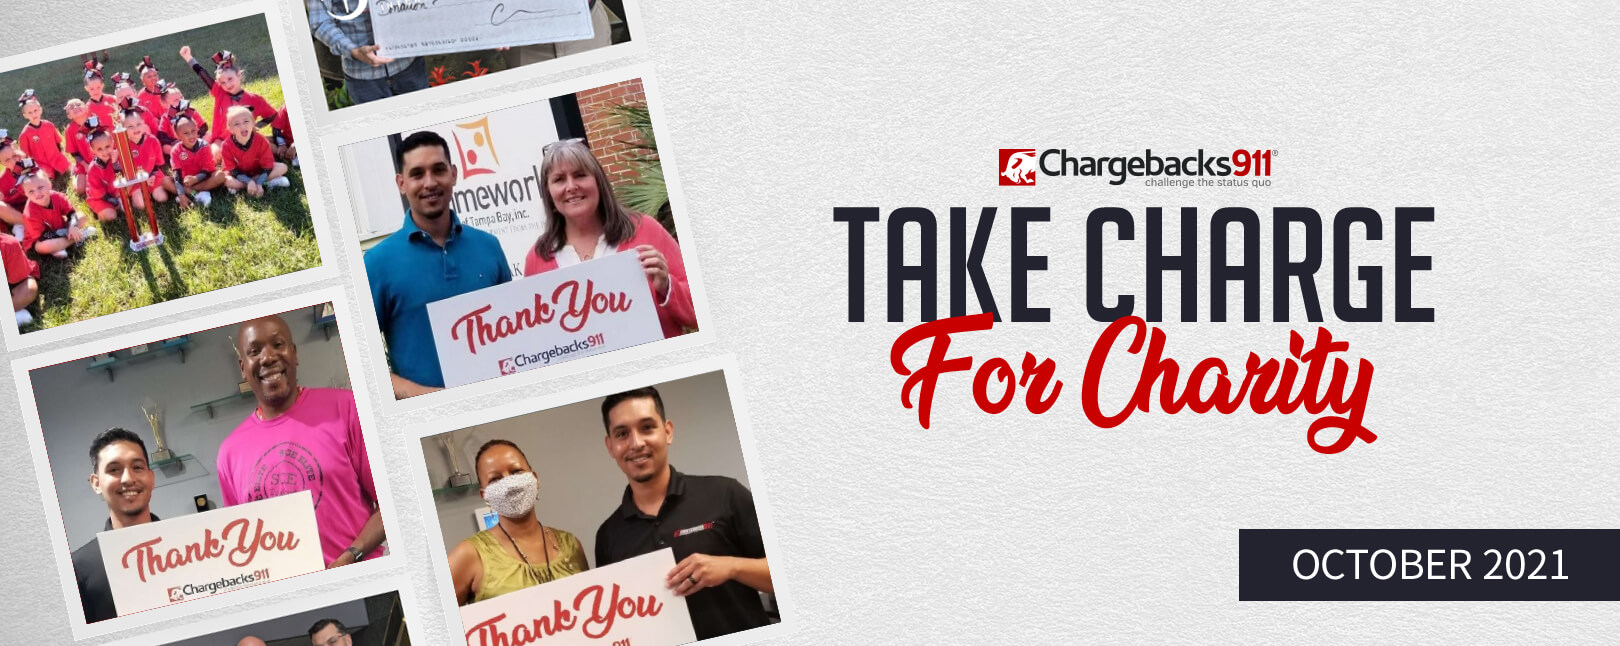 Take charge for charity